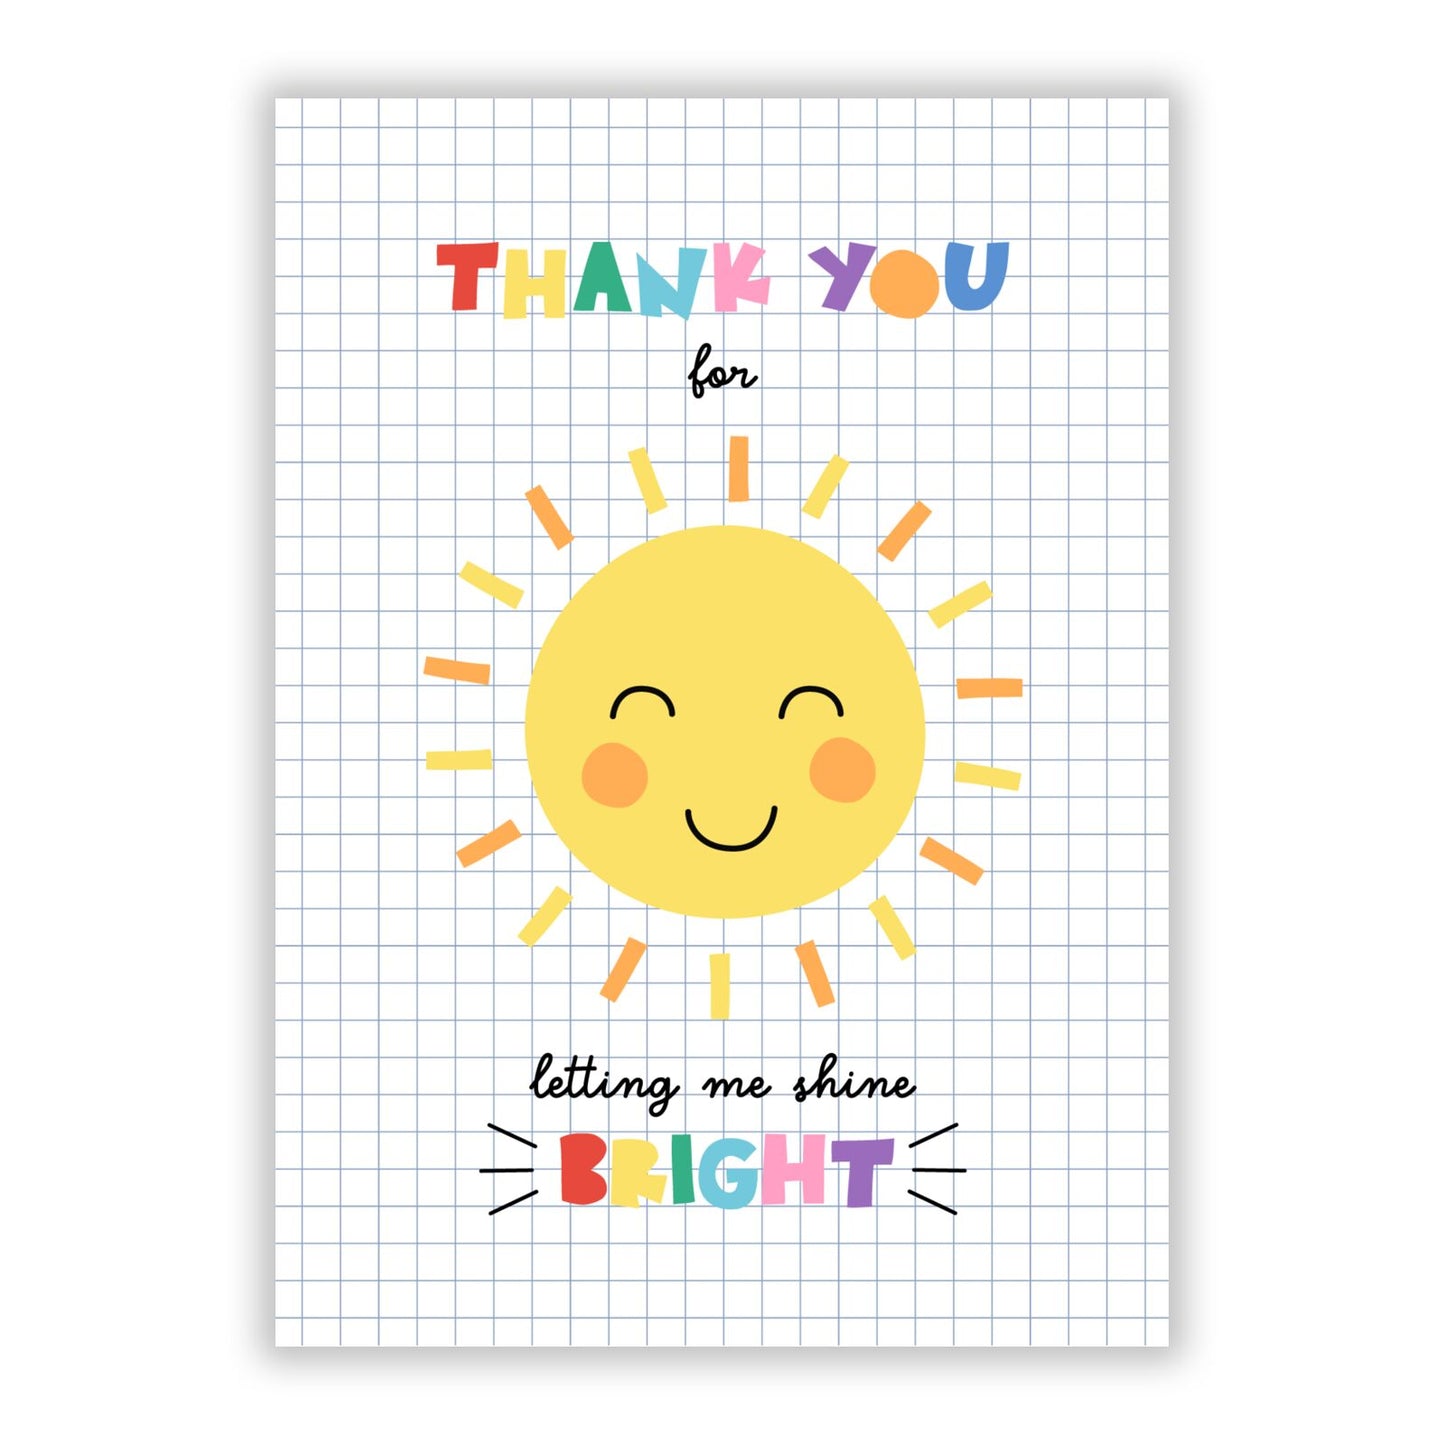 Thank You For Letting Me Shine Bright A5 Flat Greetings Card